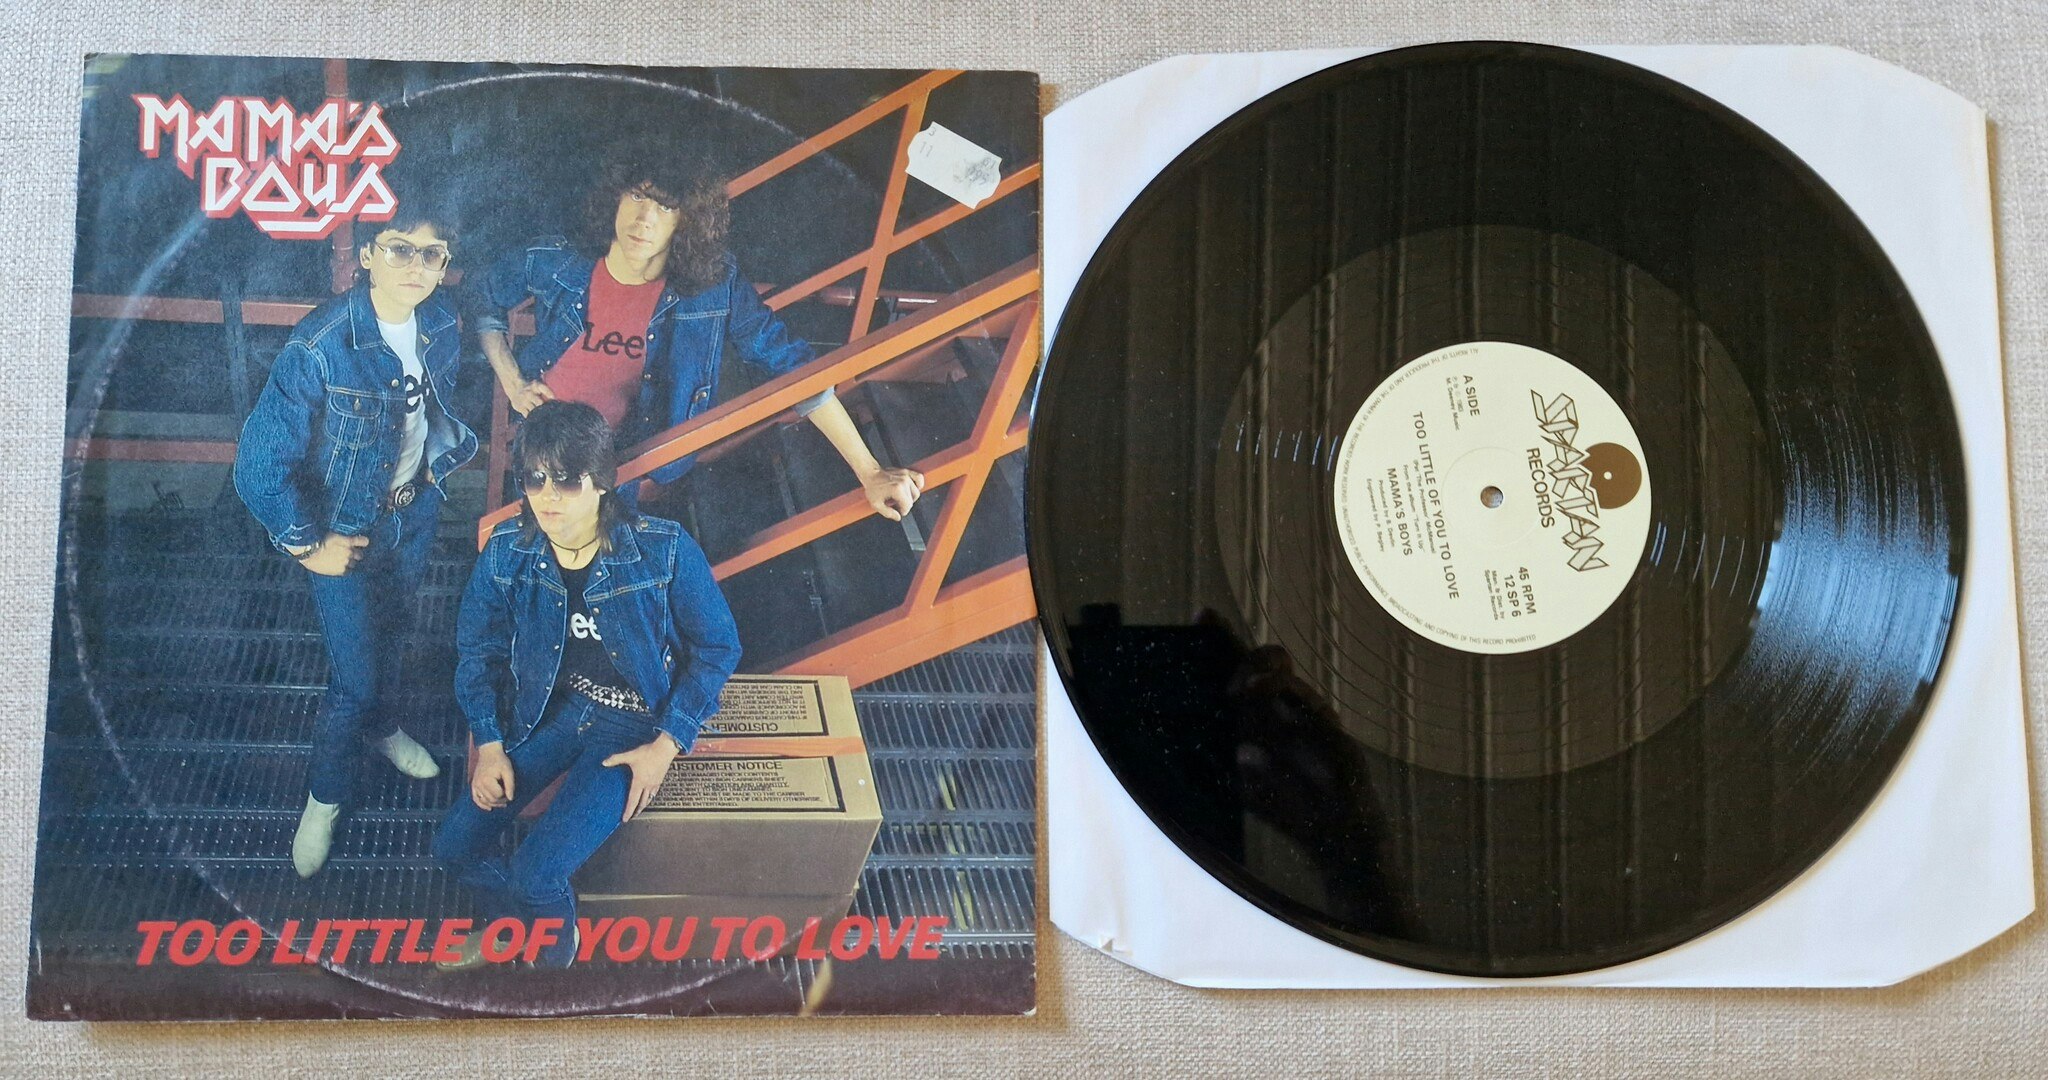 Mama's Boys, Too little of you to love. Vinyl S 12"